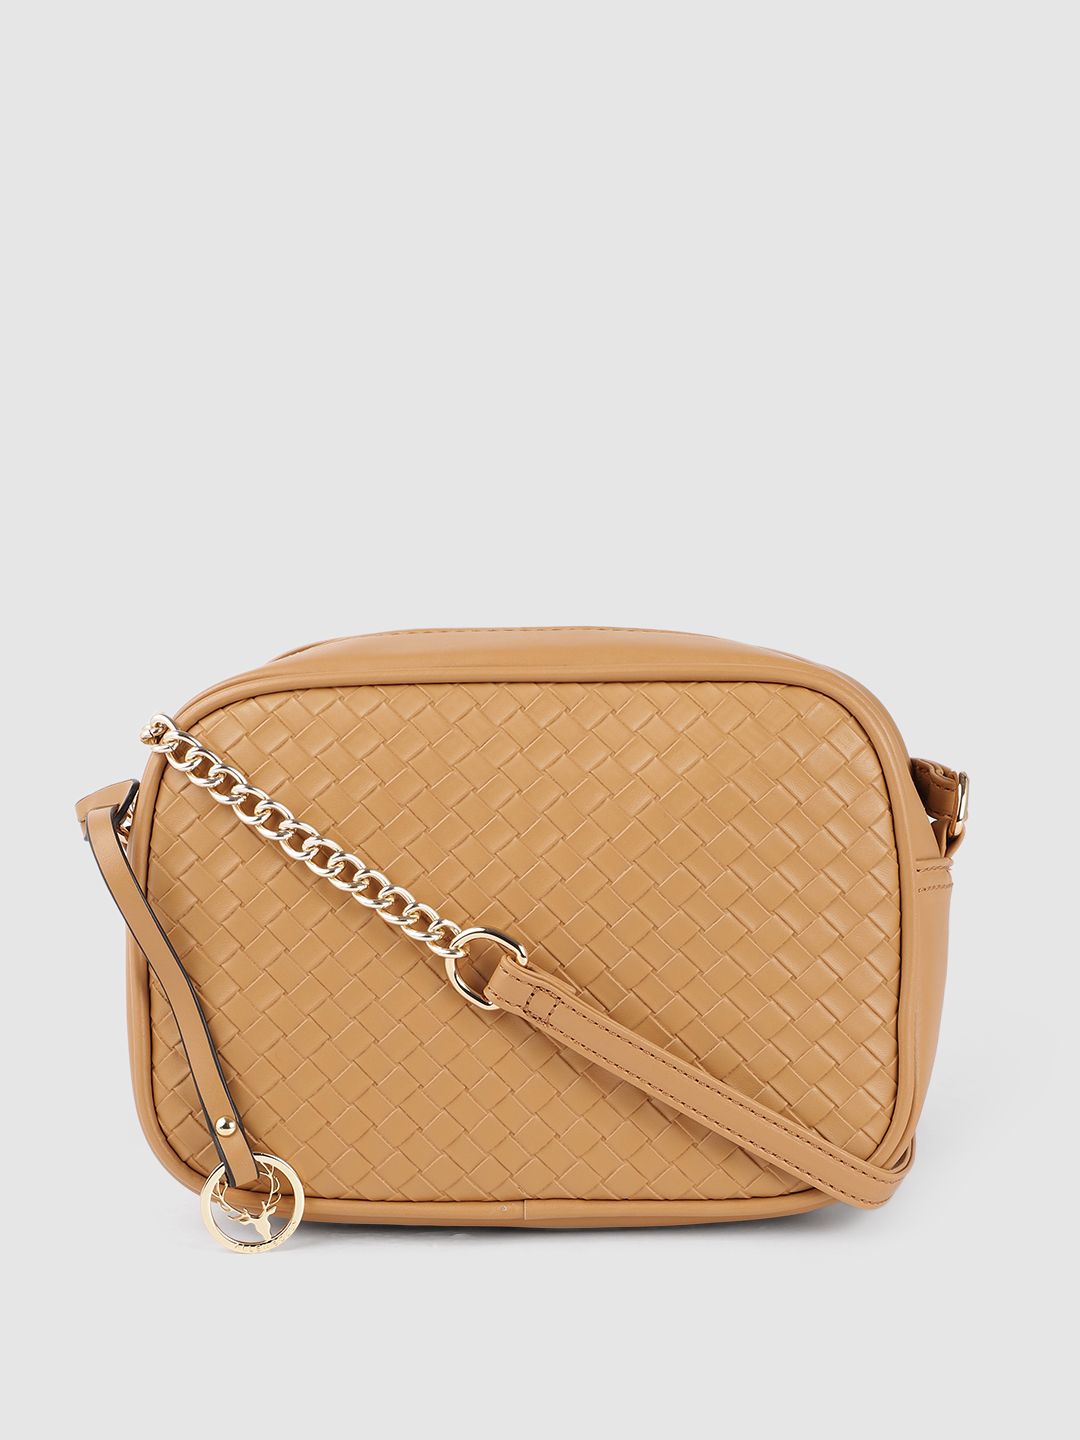 Allen Solly Beige PU Structured Sling Bag Price in India